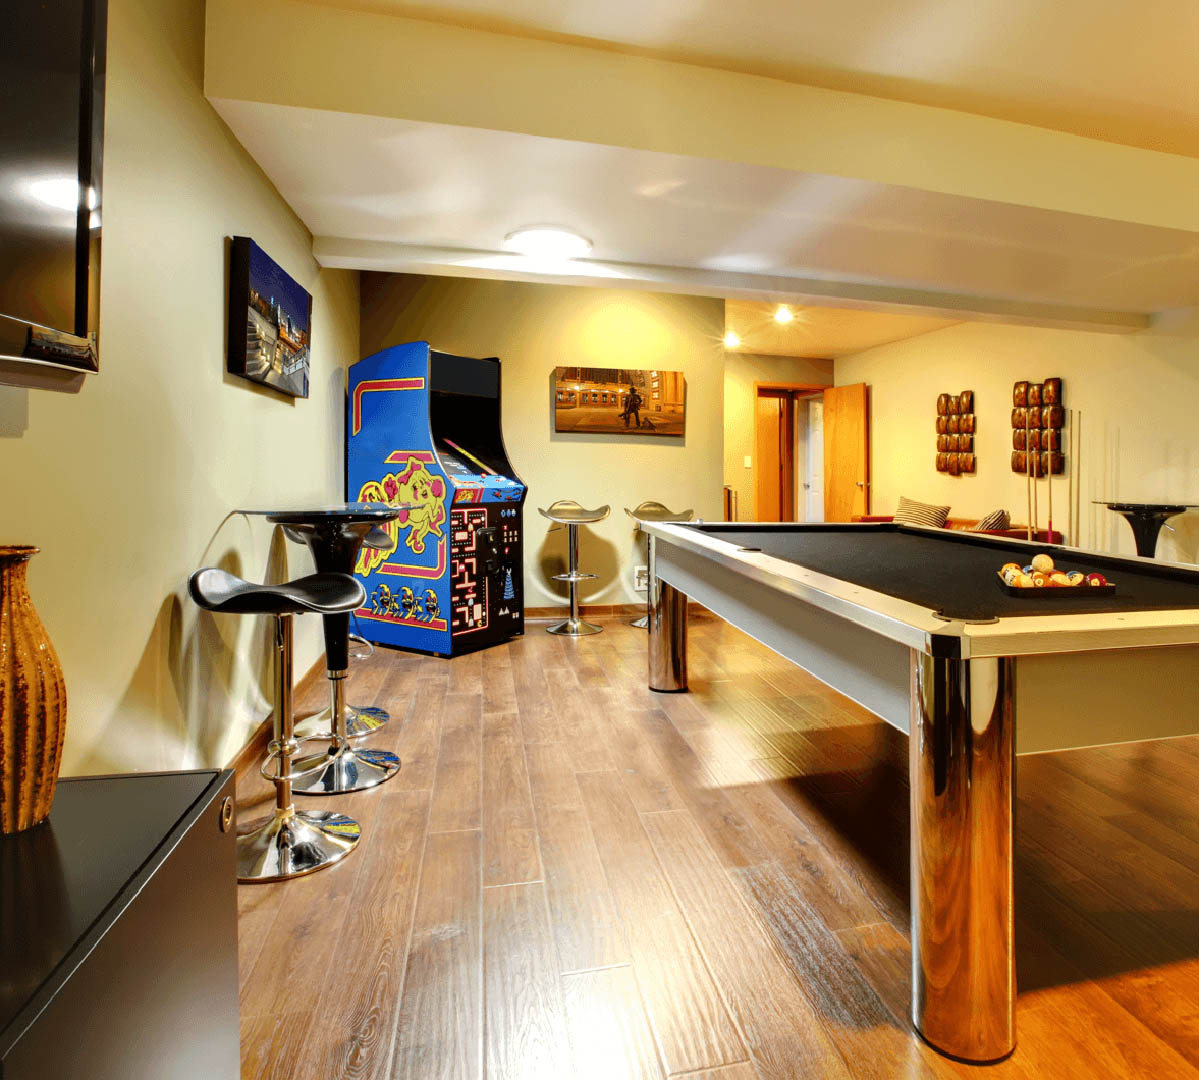 The Best Floor Plans for a Finished Basement Games Room Image